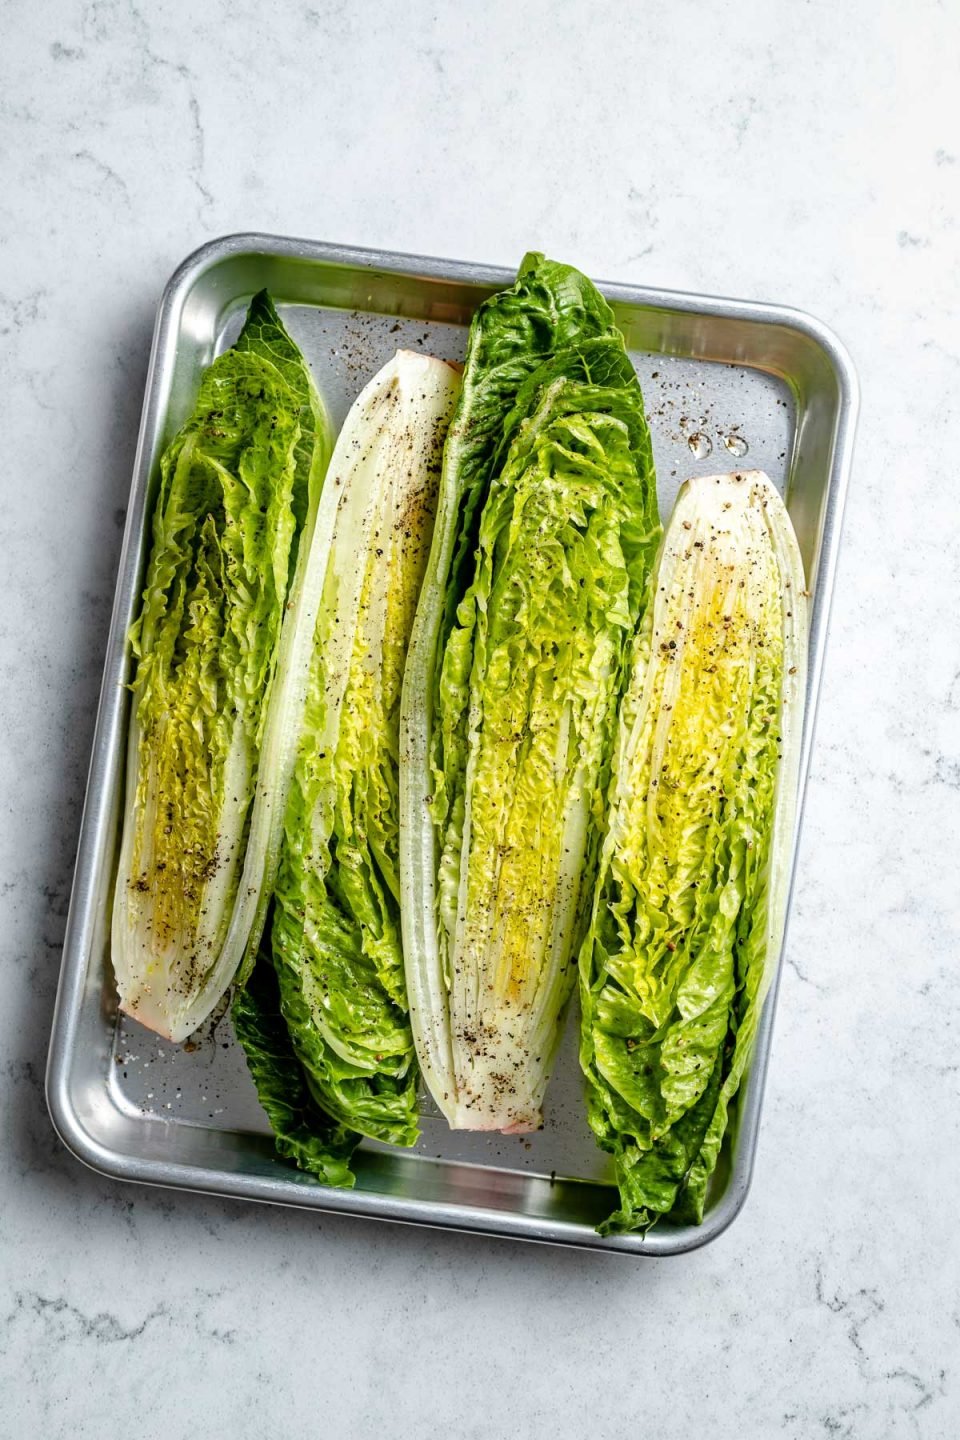 Fresh & uncooked romaine lettuce sliced in half lengthwise & seasoned with oil and ground black pepper lie cut-side up on an aluminum baking sheet. The baking sheet sits on top of a white & gray marble surface.